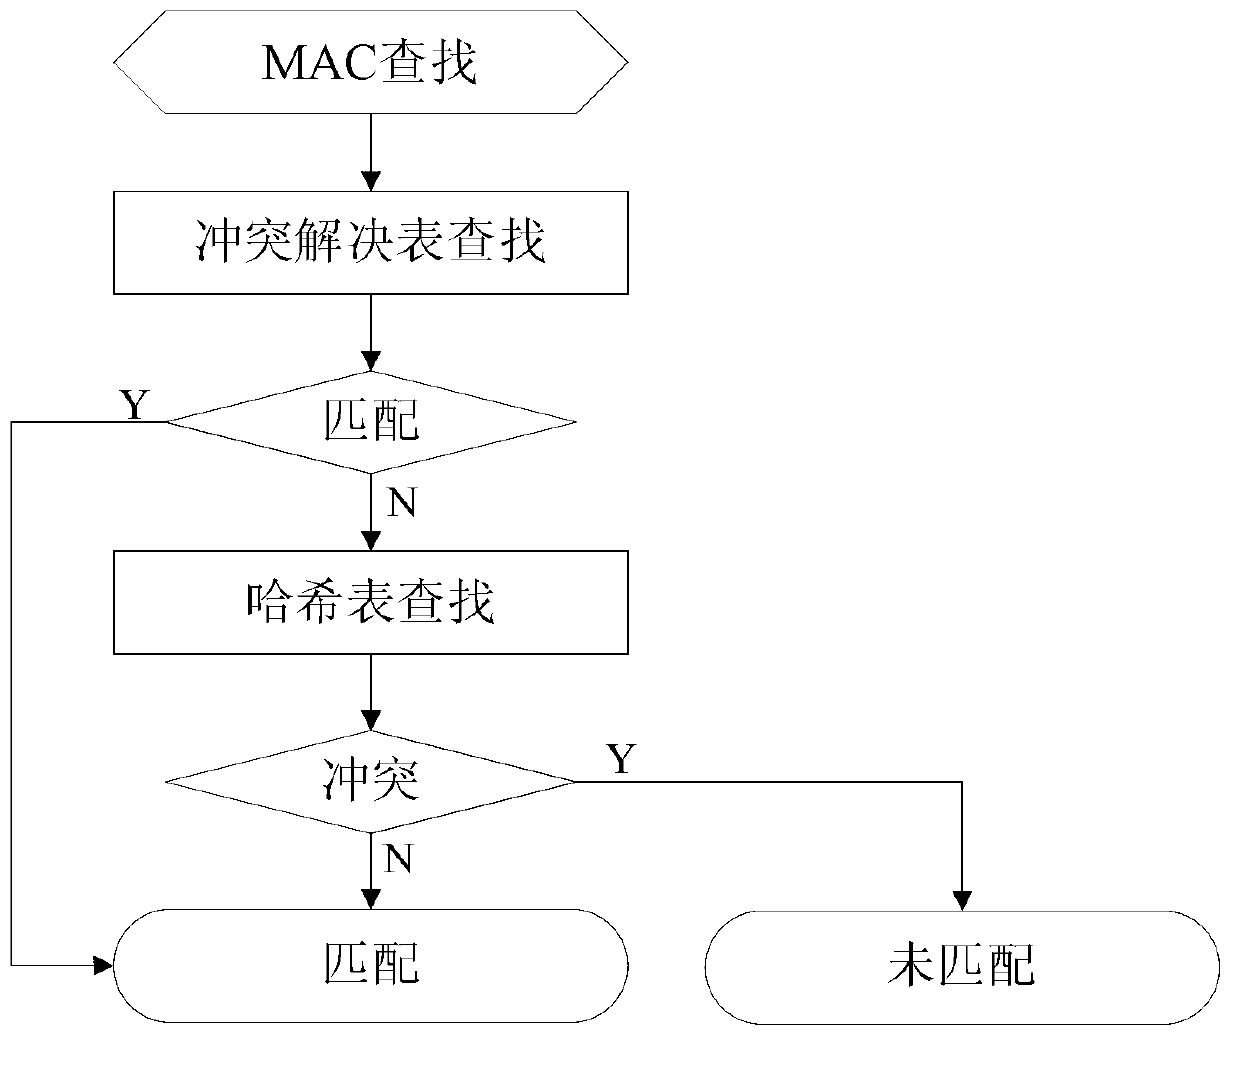 Determination method and device for media access control (MAC) address Hash collision